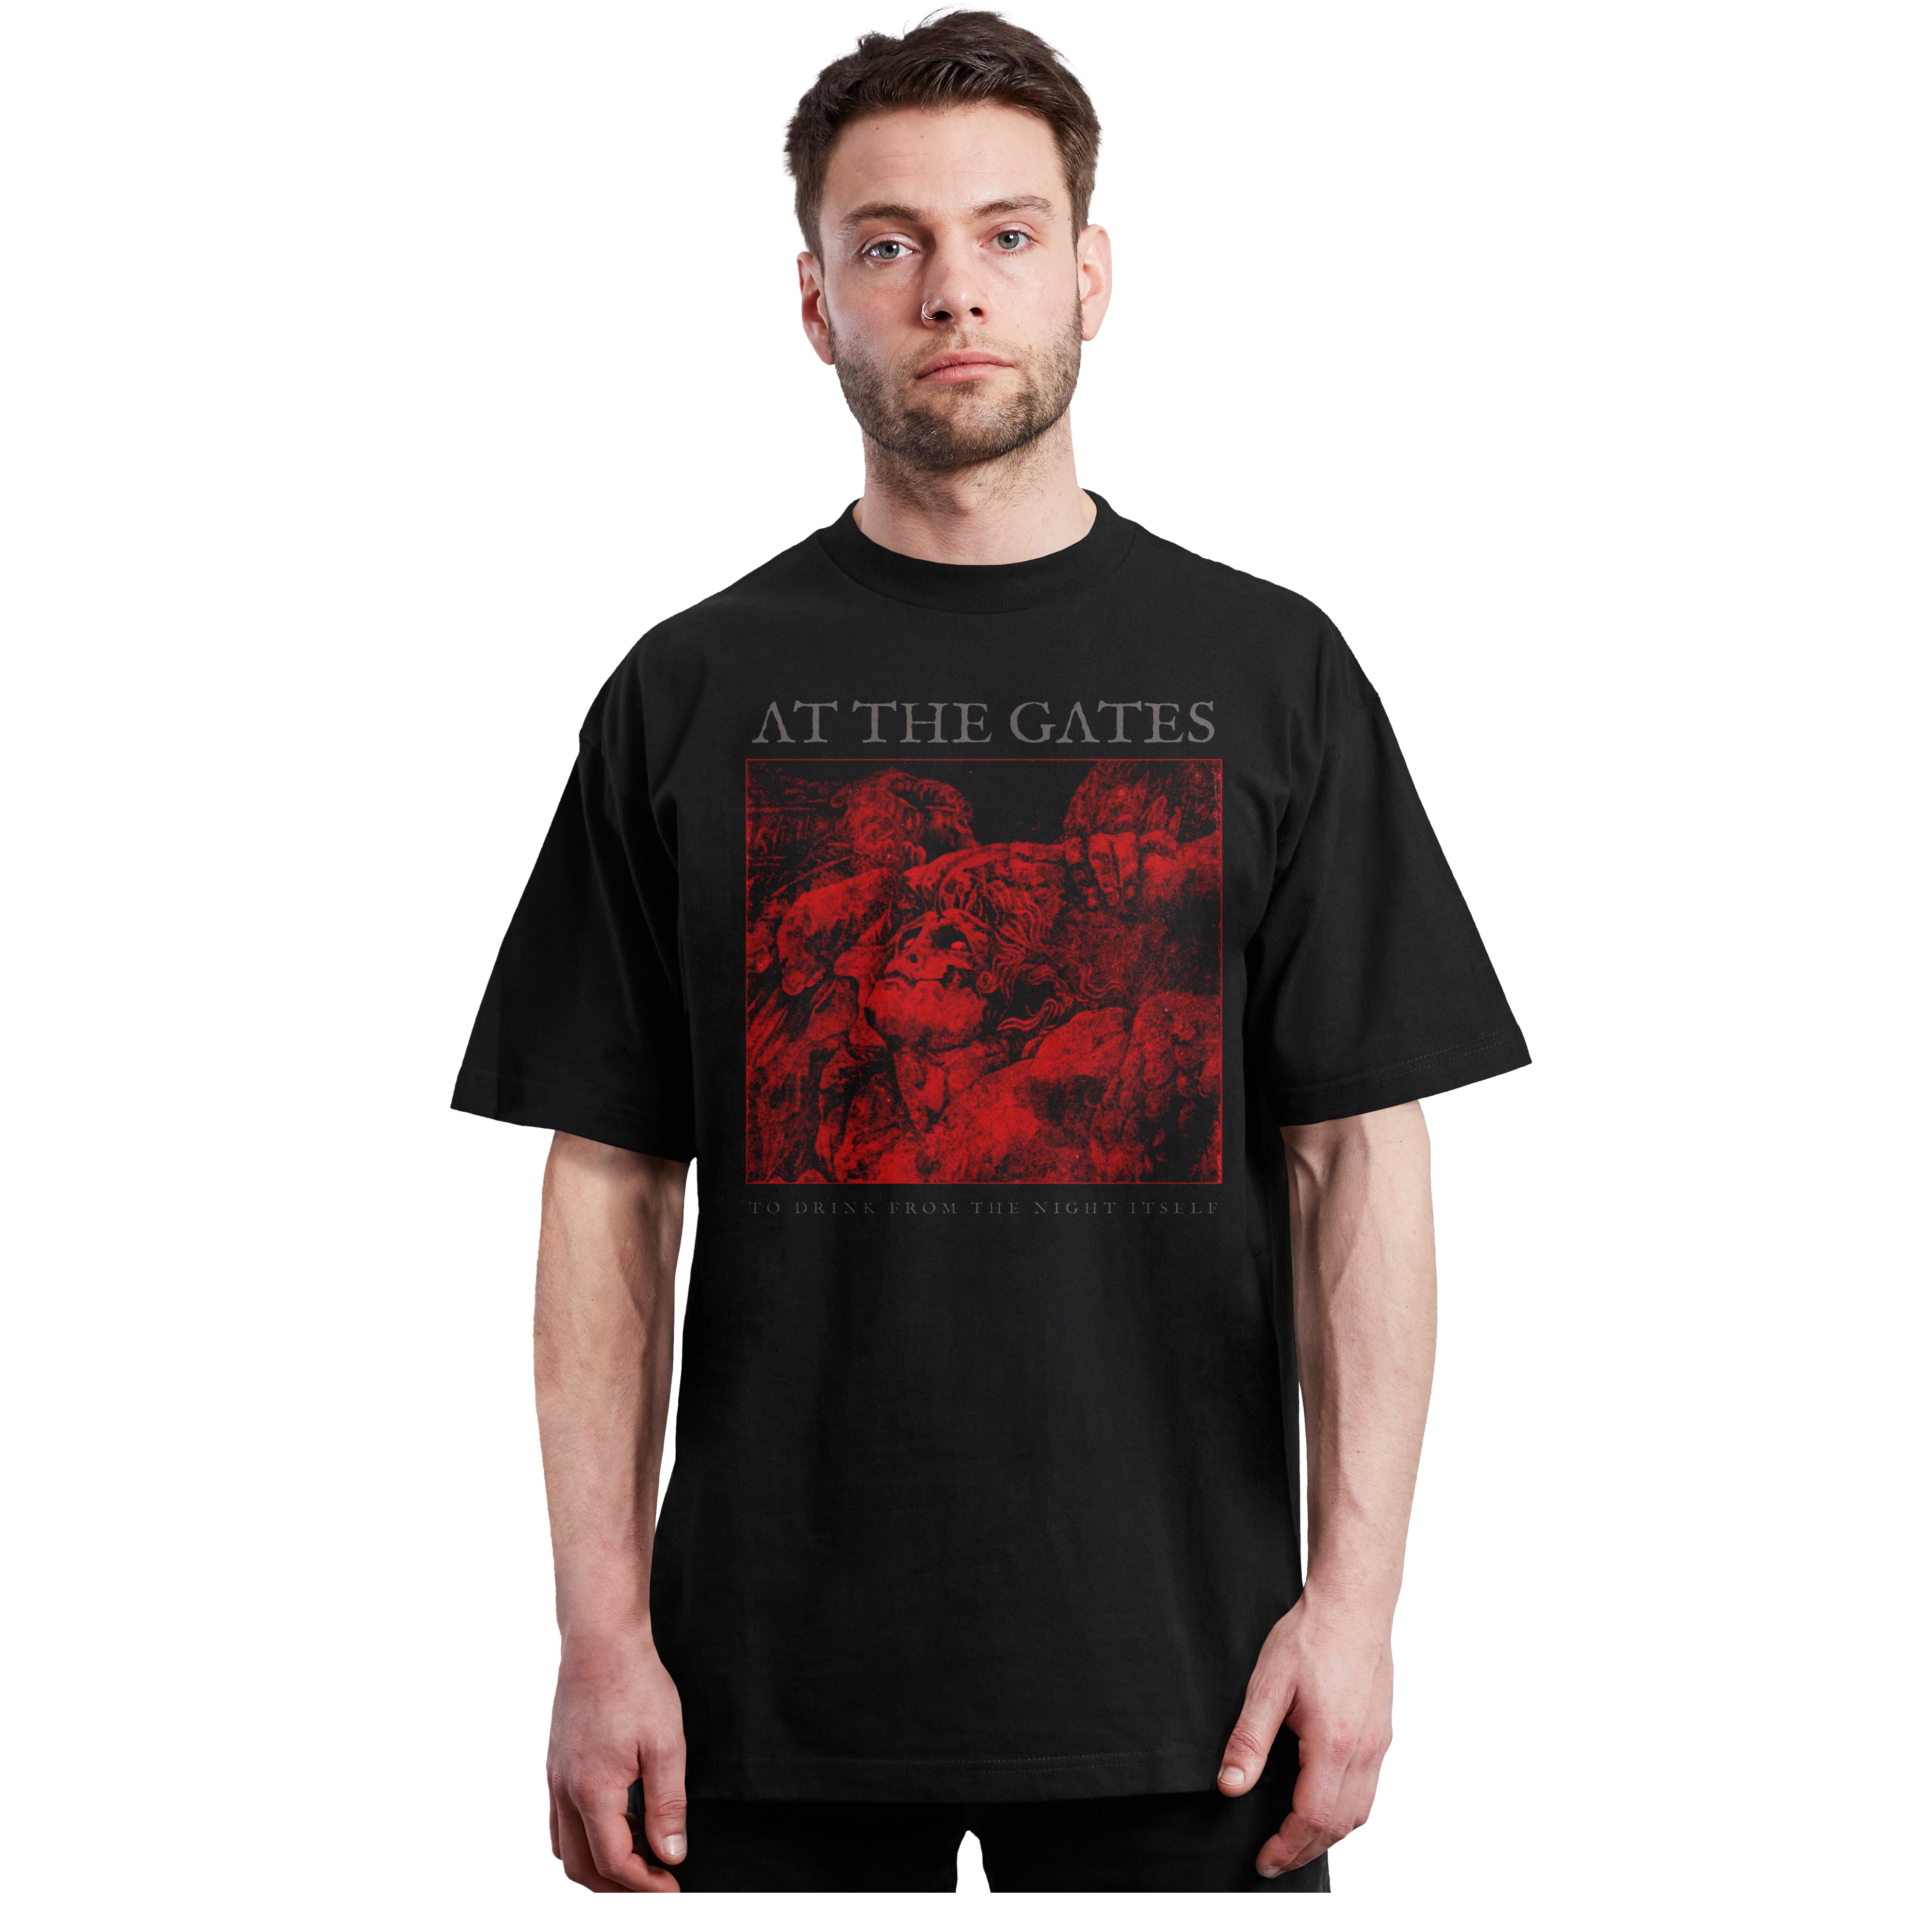 At The Gates - To Drink From The Night Itself - Polera